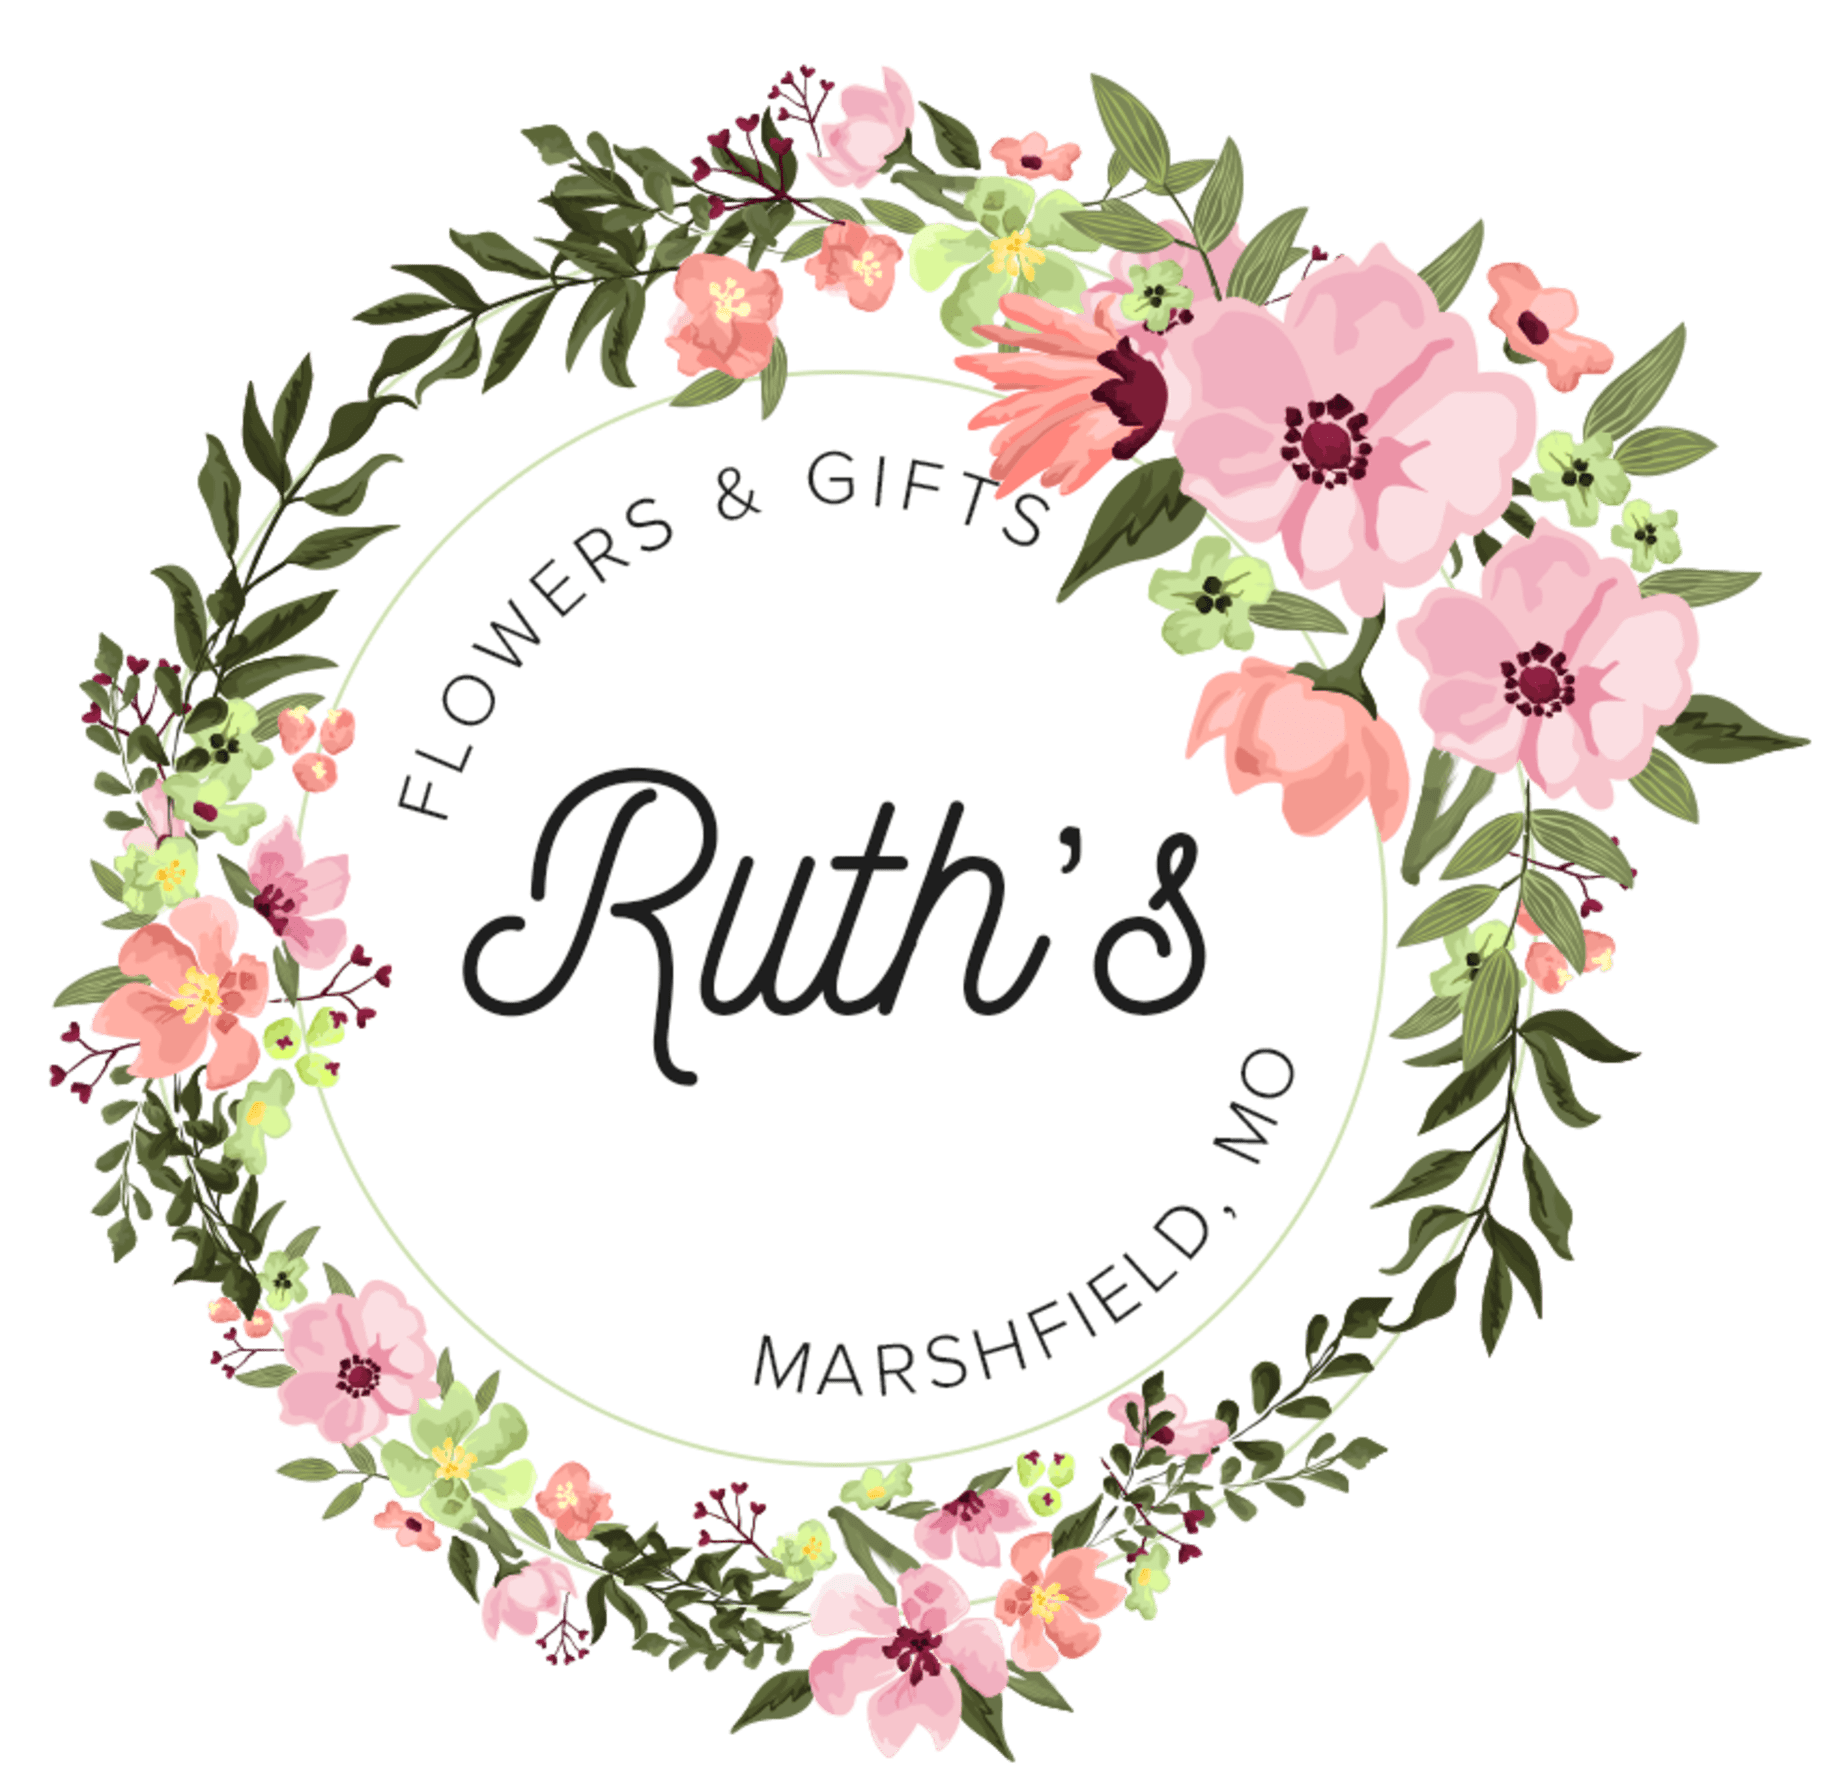 Marshfield Florist  Flower Delivery by Ruth's Flowers & Gifts